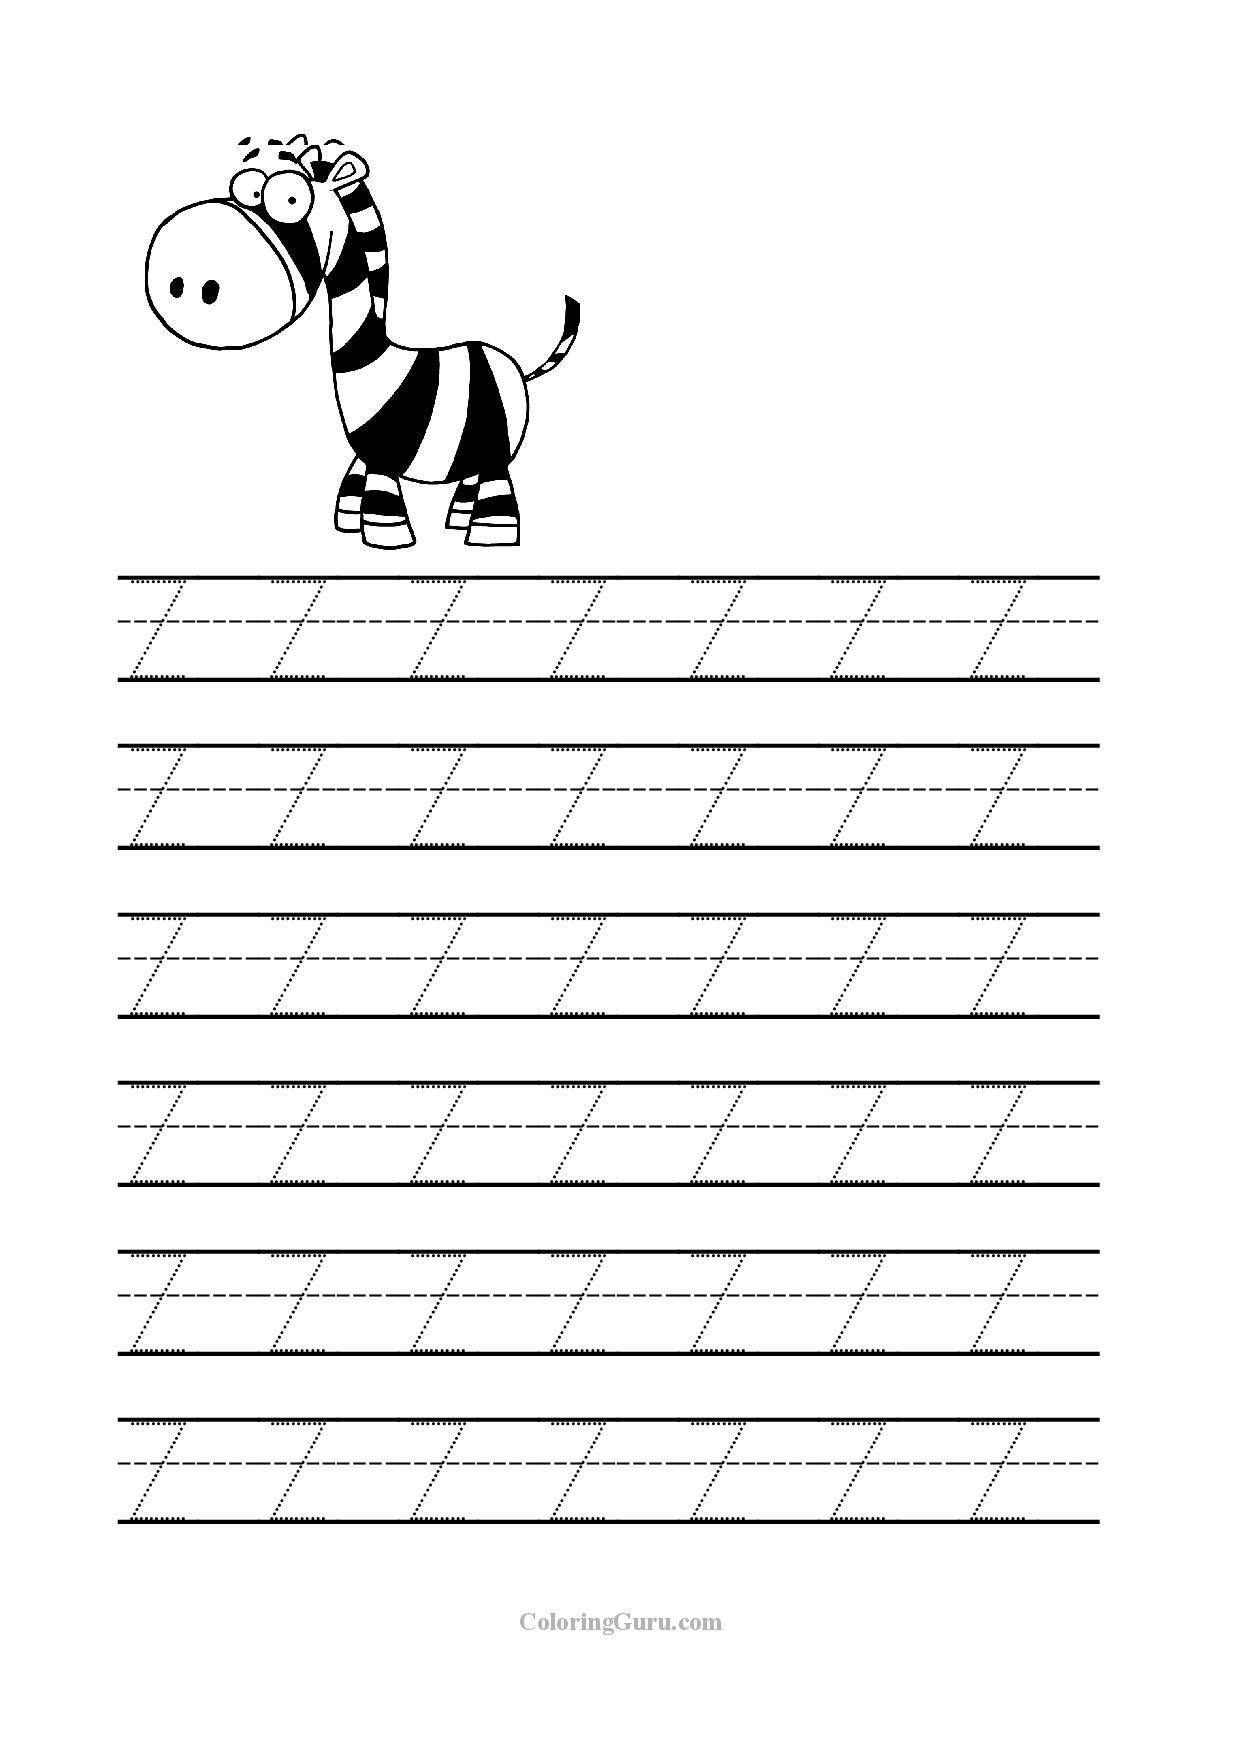 Free Printable Tracing Letter Z Worksheets For Preschool intended for Letter Z Worksheets Pre K